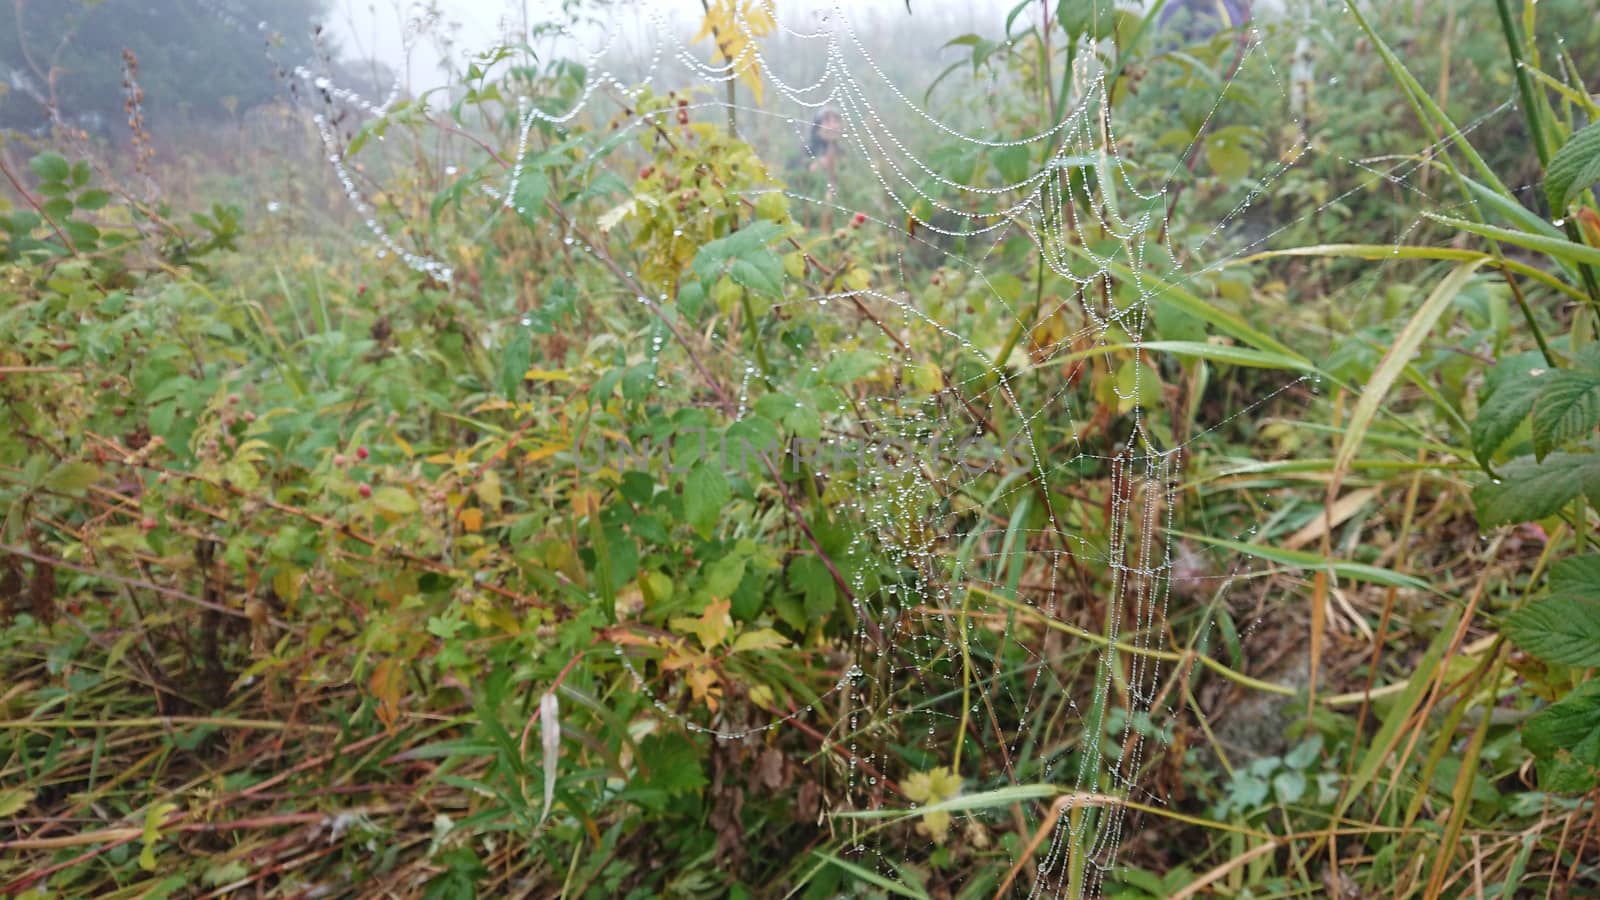 Dew drops on the green grass and cobwebs in the fog. In the distance, tourists walk along the trail, disappearing from sight in the fog. Mountainous area after the rain. Green grass, ear, flowers.